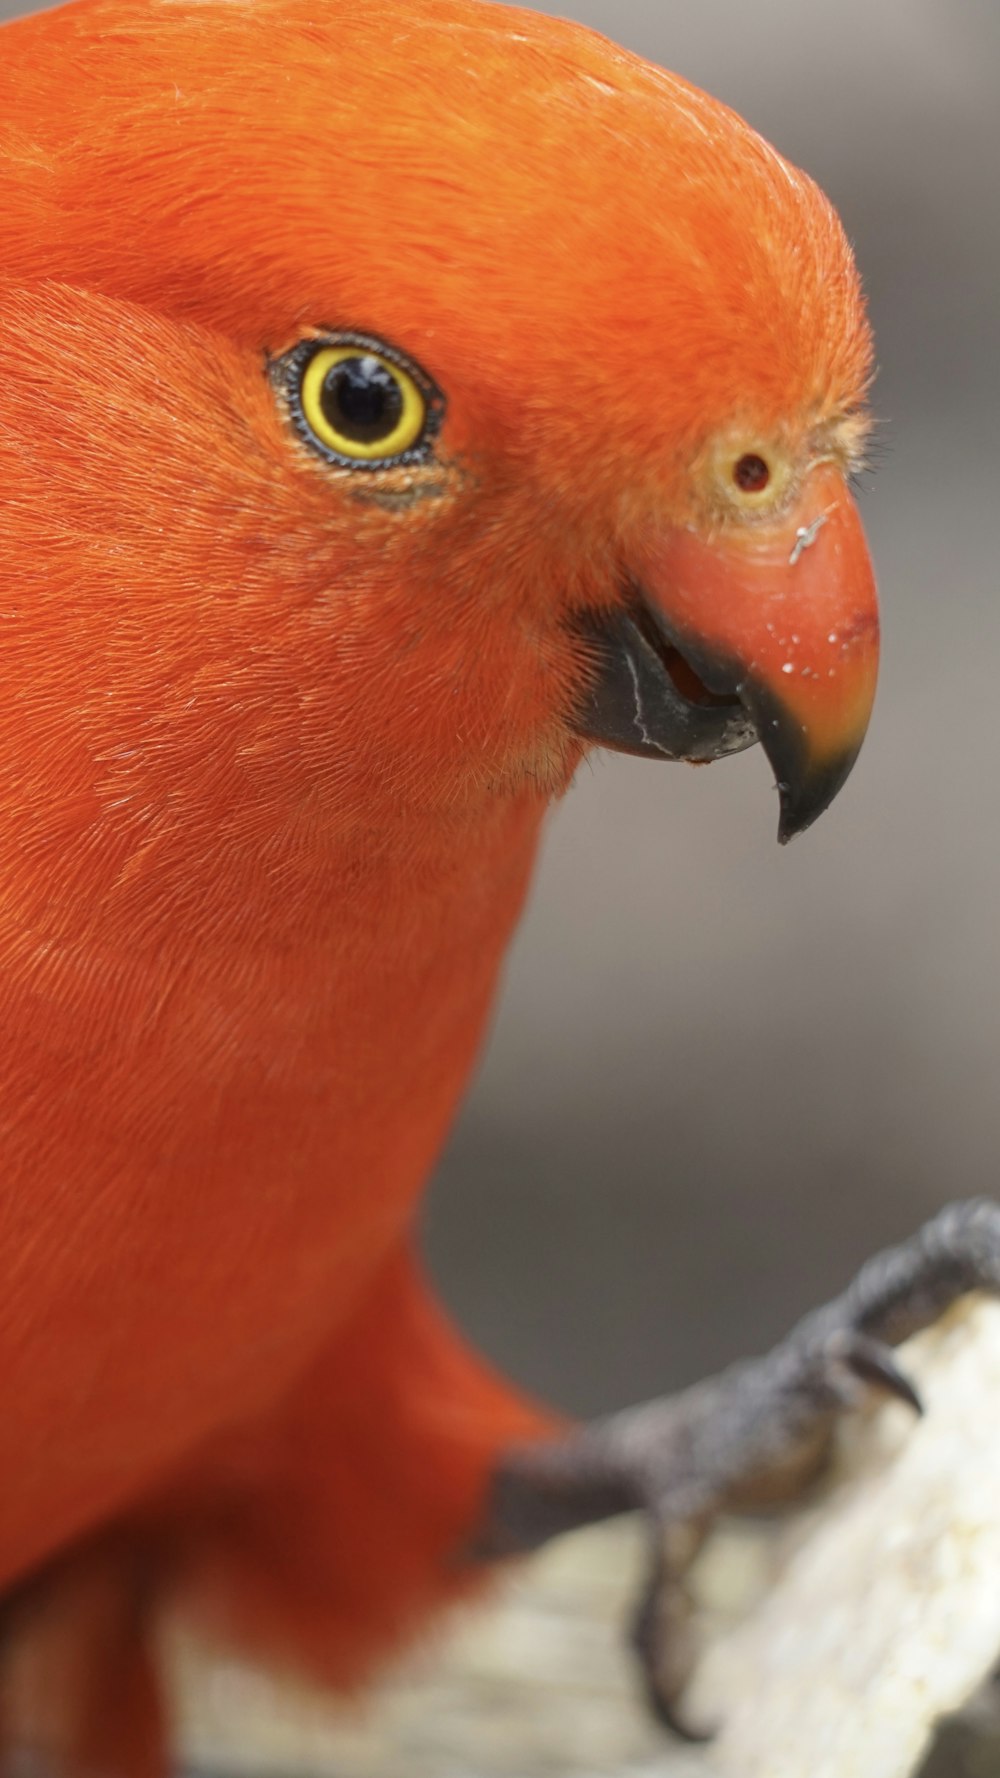 a close up of a red bird with yellow eyes